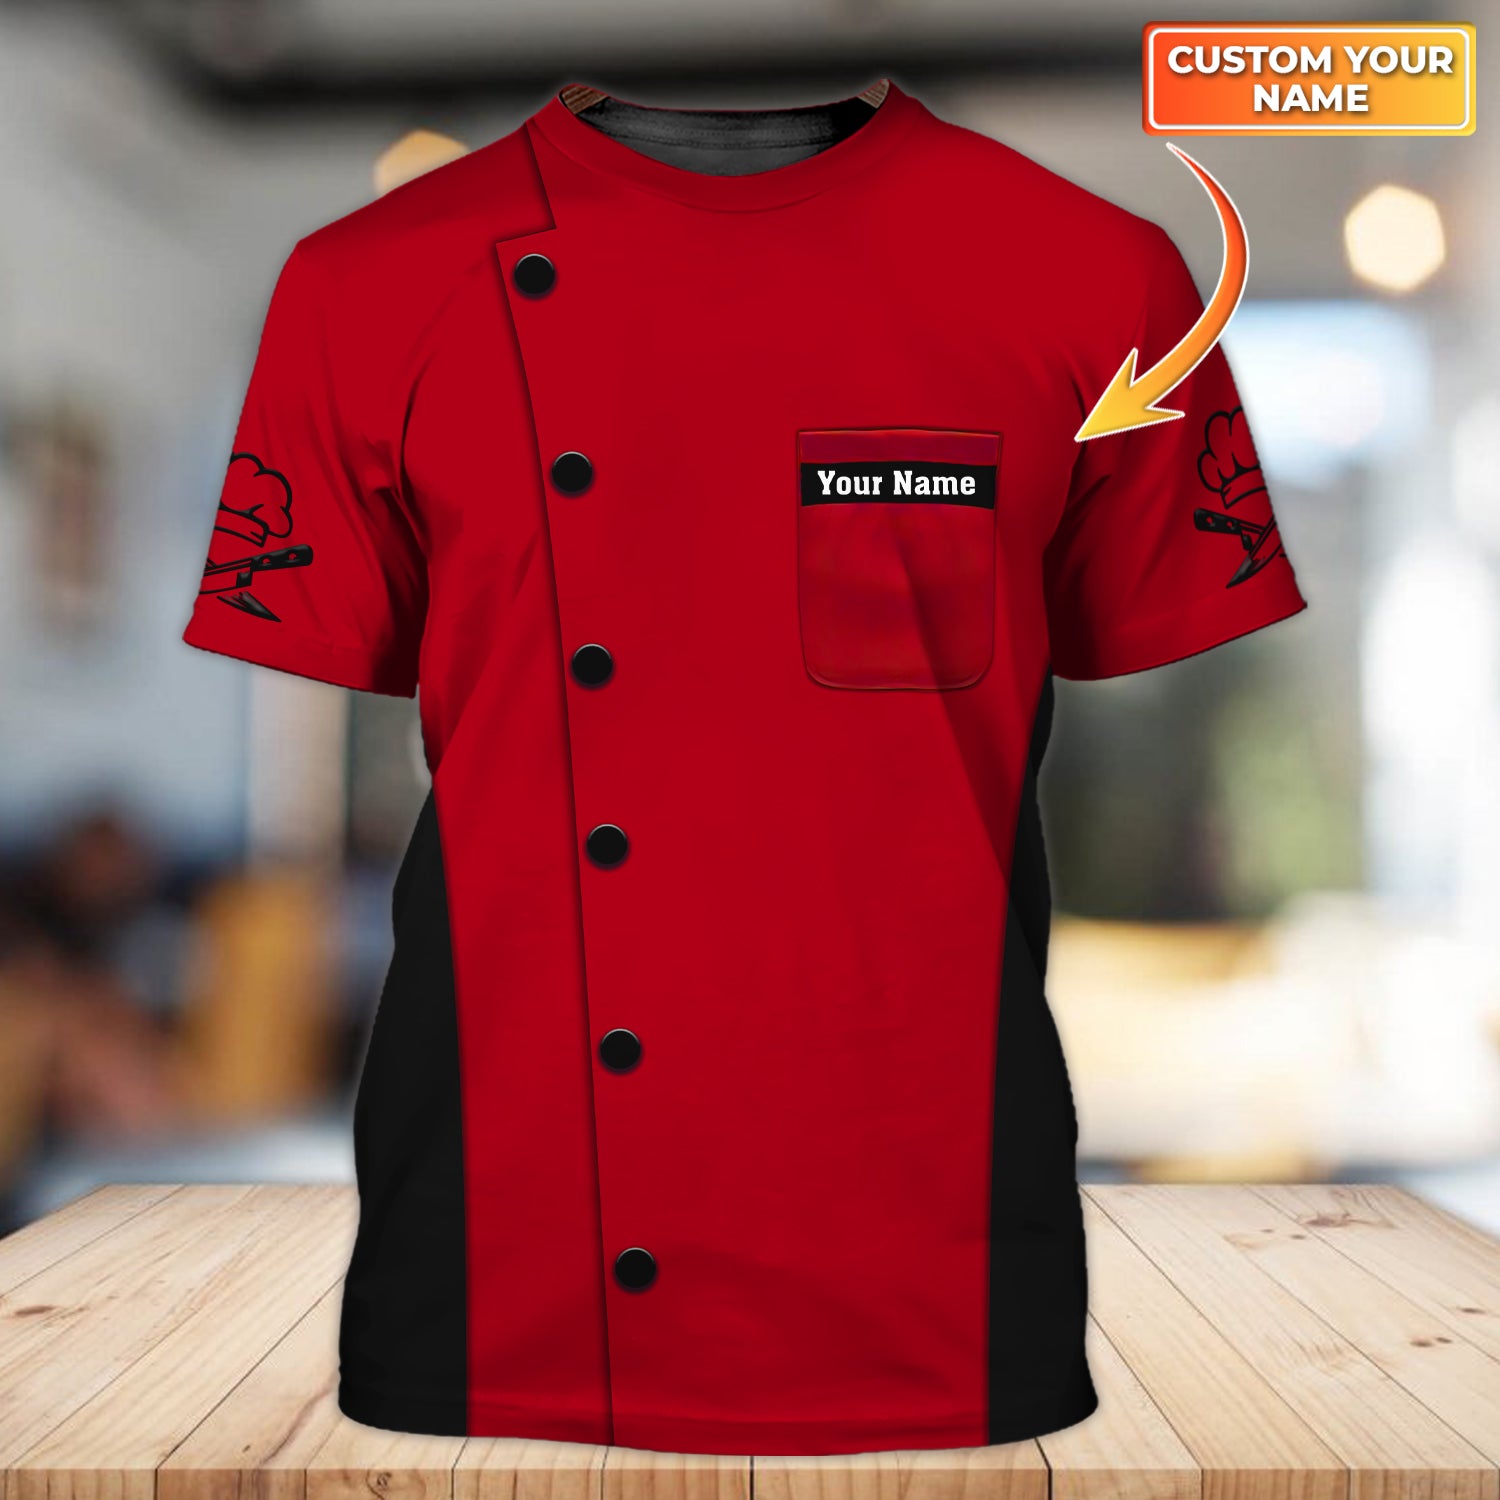 Chef, Cook, Personalized Name 3D Tshirt TD96-1188 (Non Workwear)